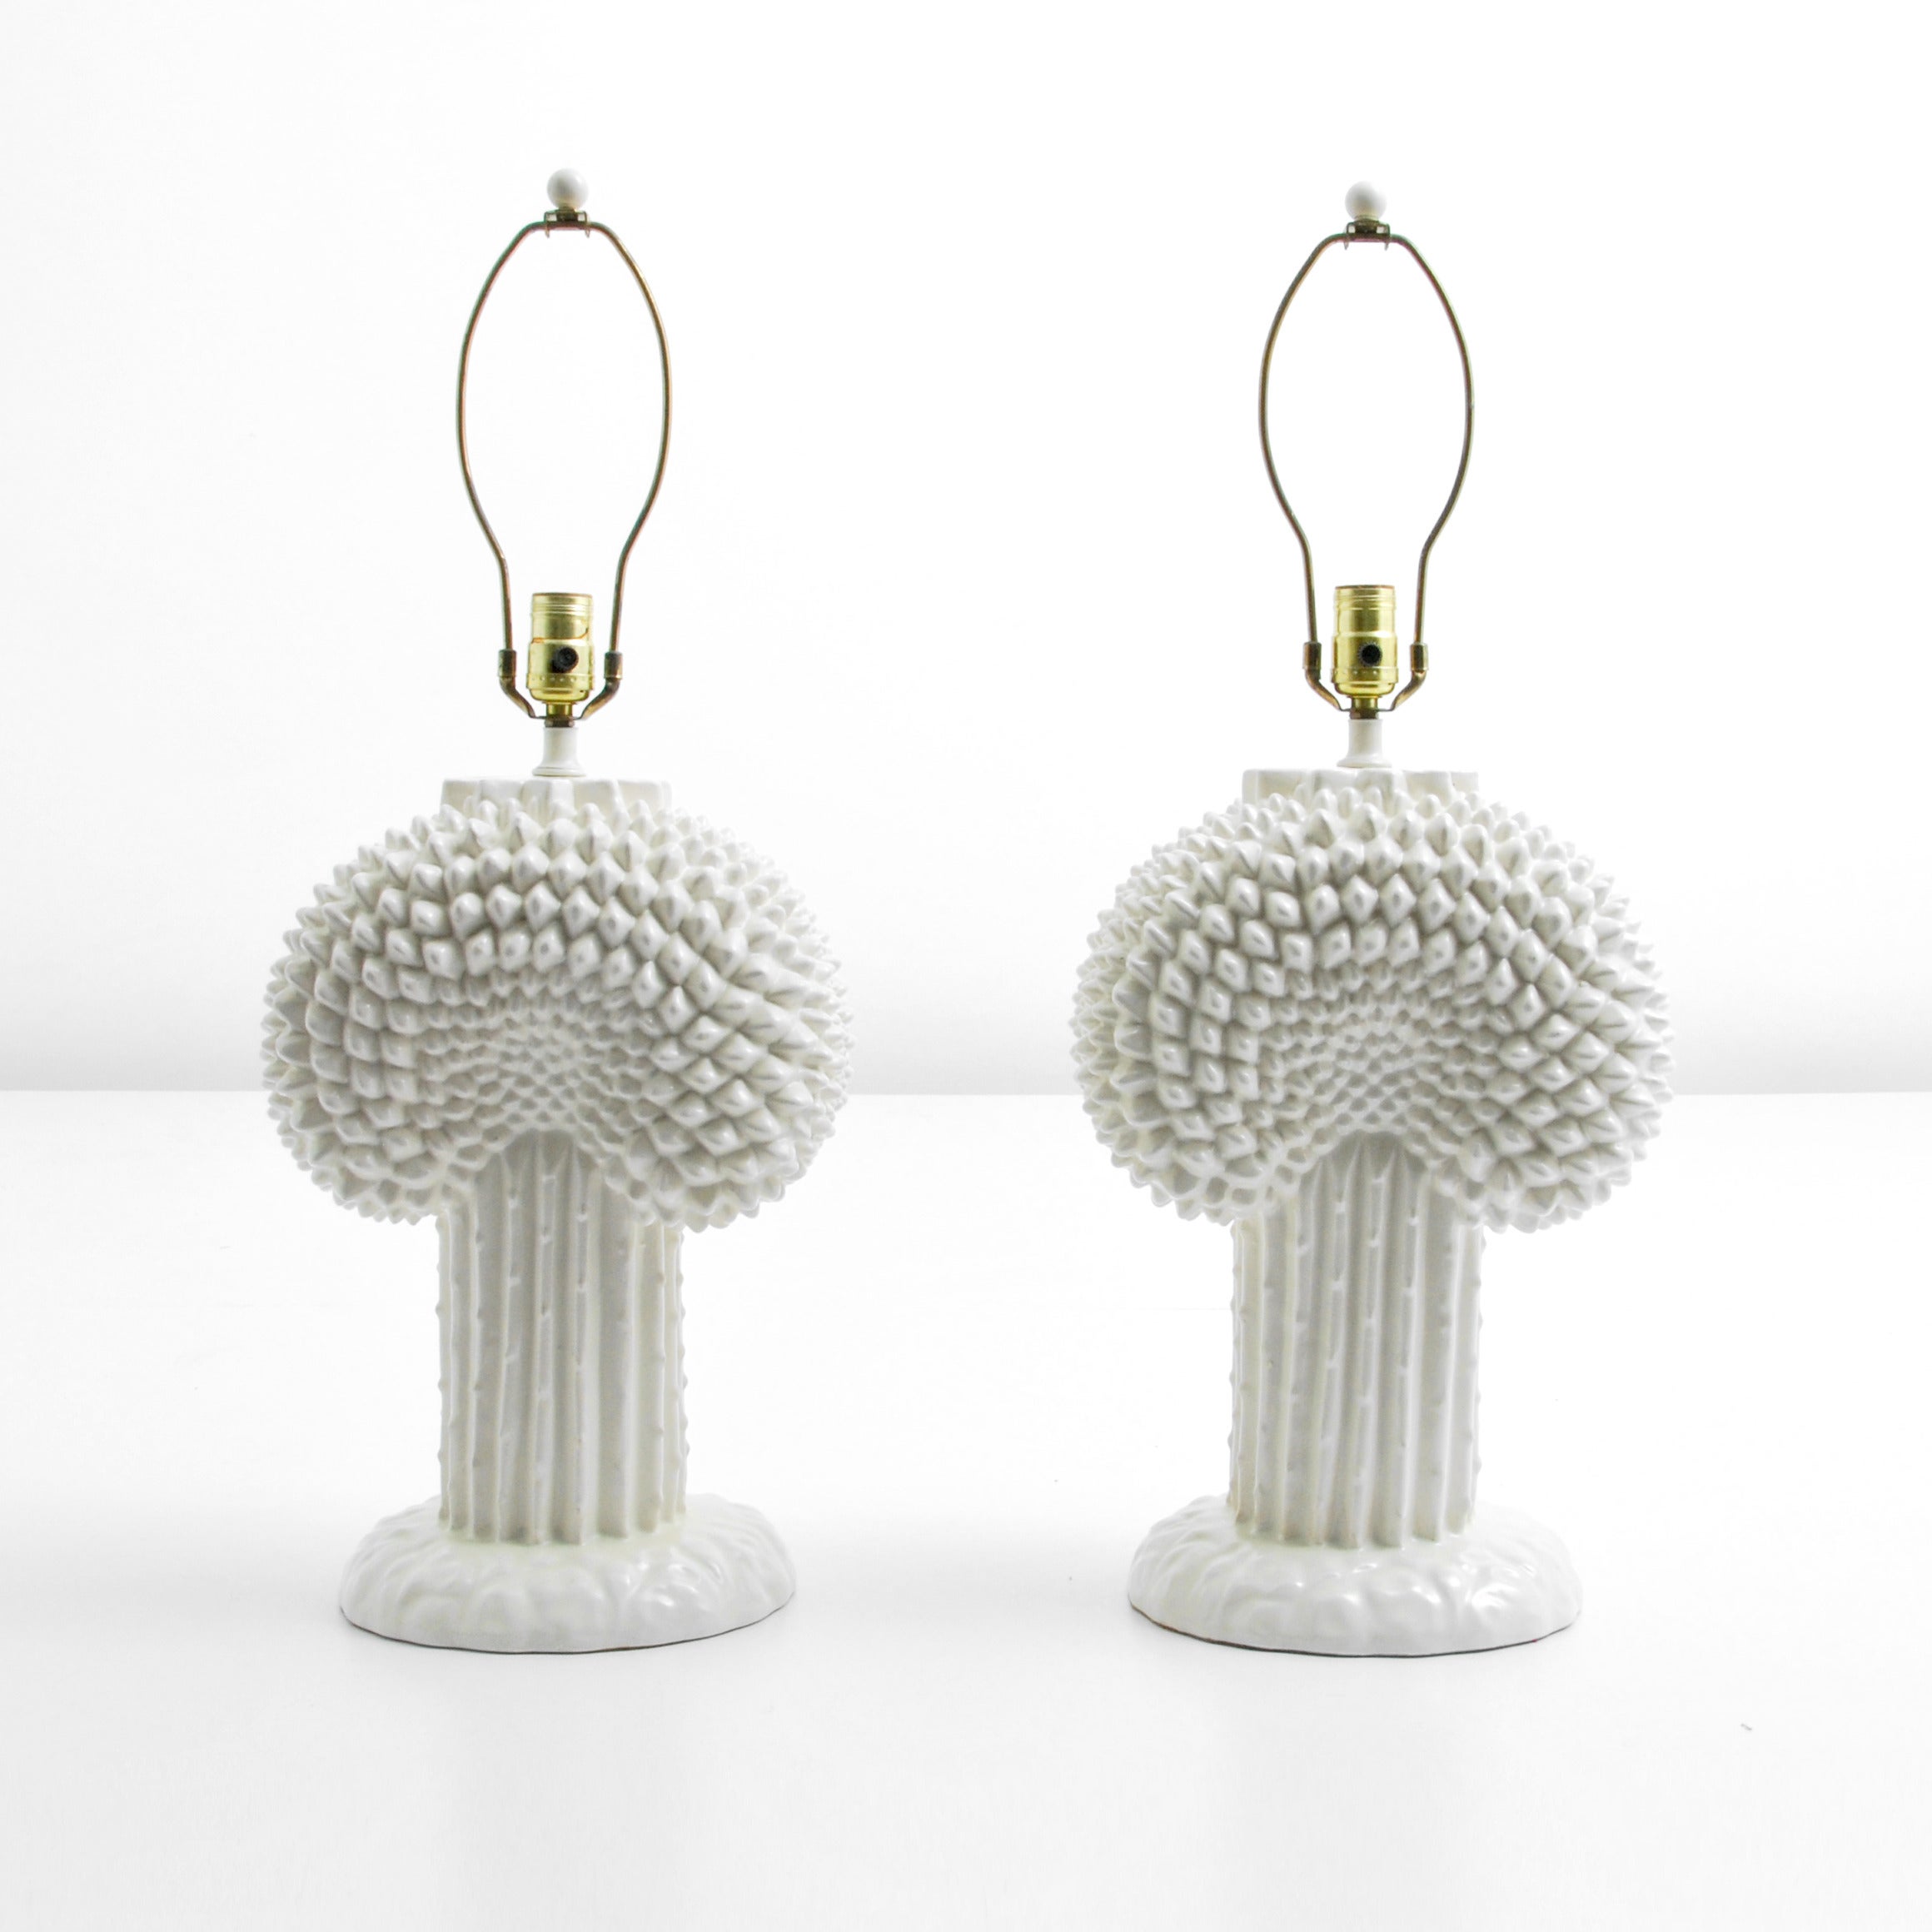 Pair of Cactus Form Lamps, Manner of Serge Roche, Circa 1965